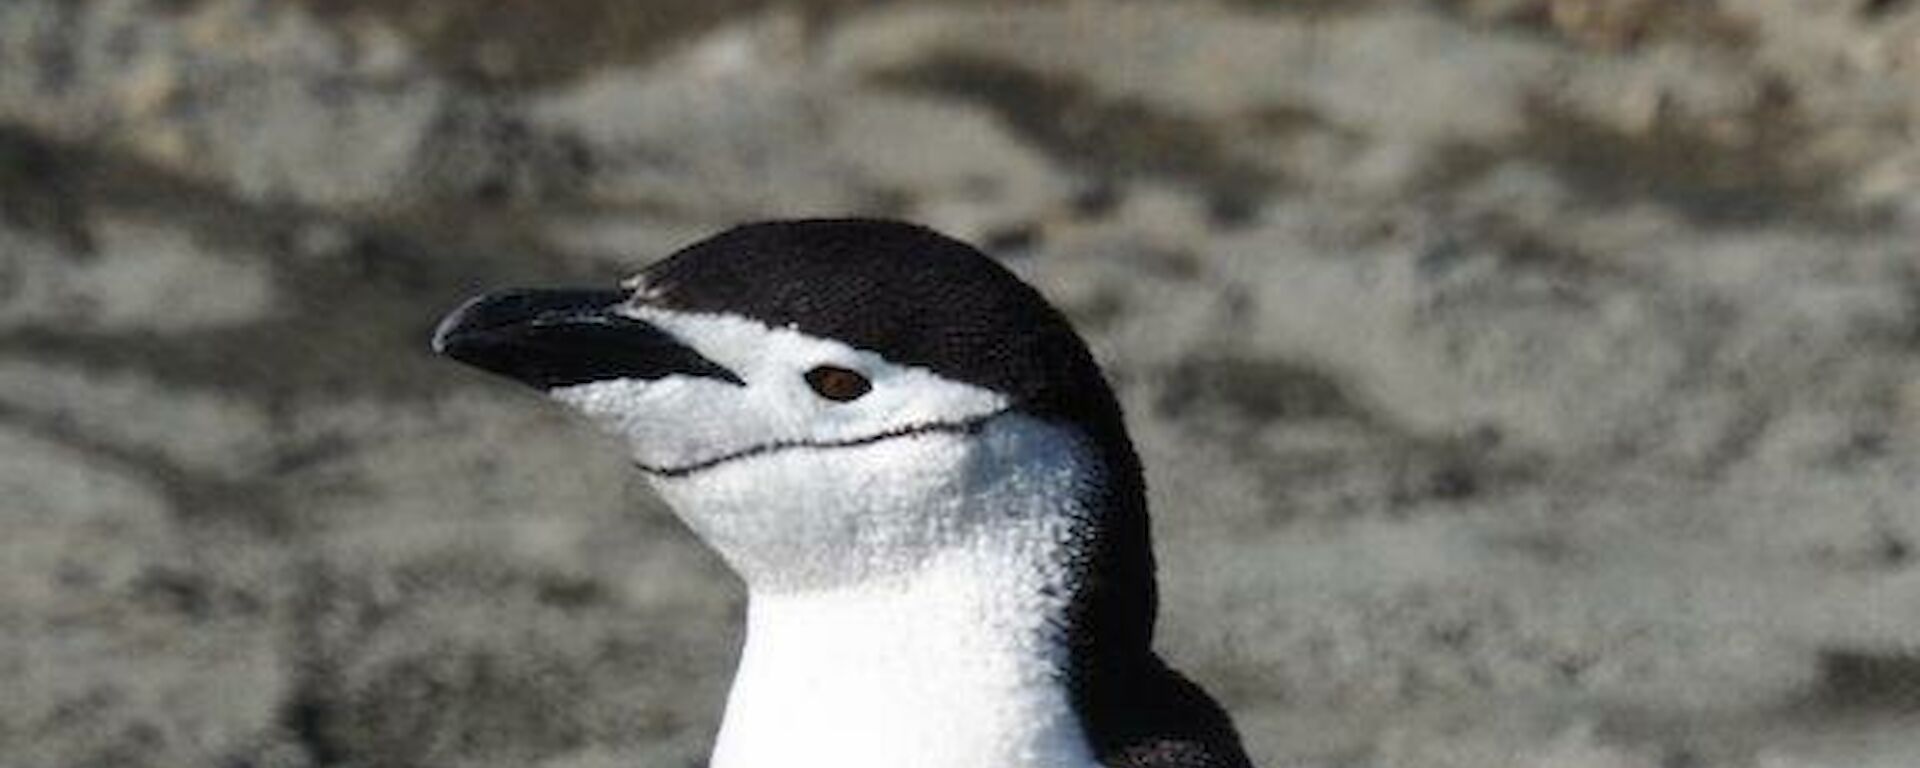 A chinstrap penguin visiting the isthmus. The chinstrap has a distinctive black line that goes from the back of the head around the front of the face